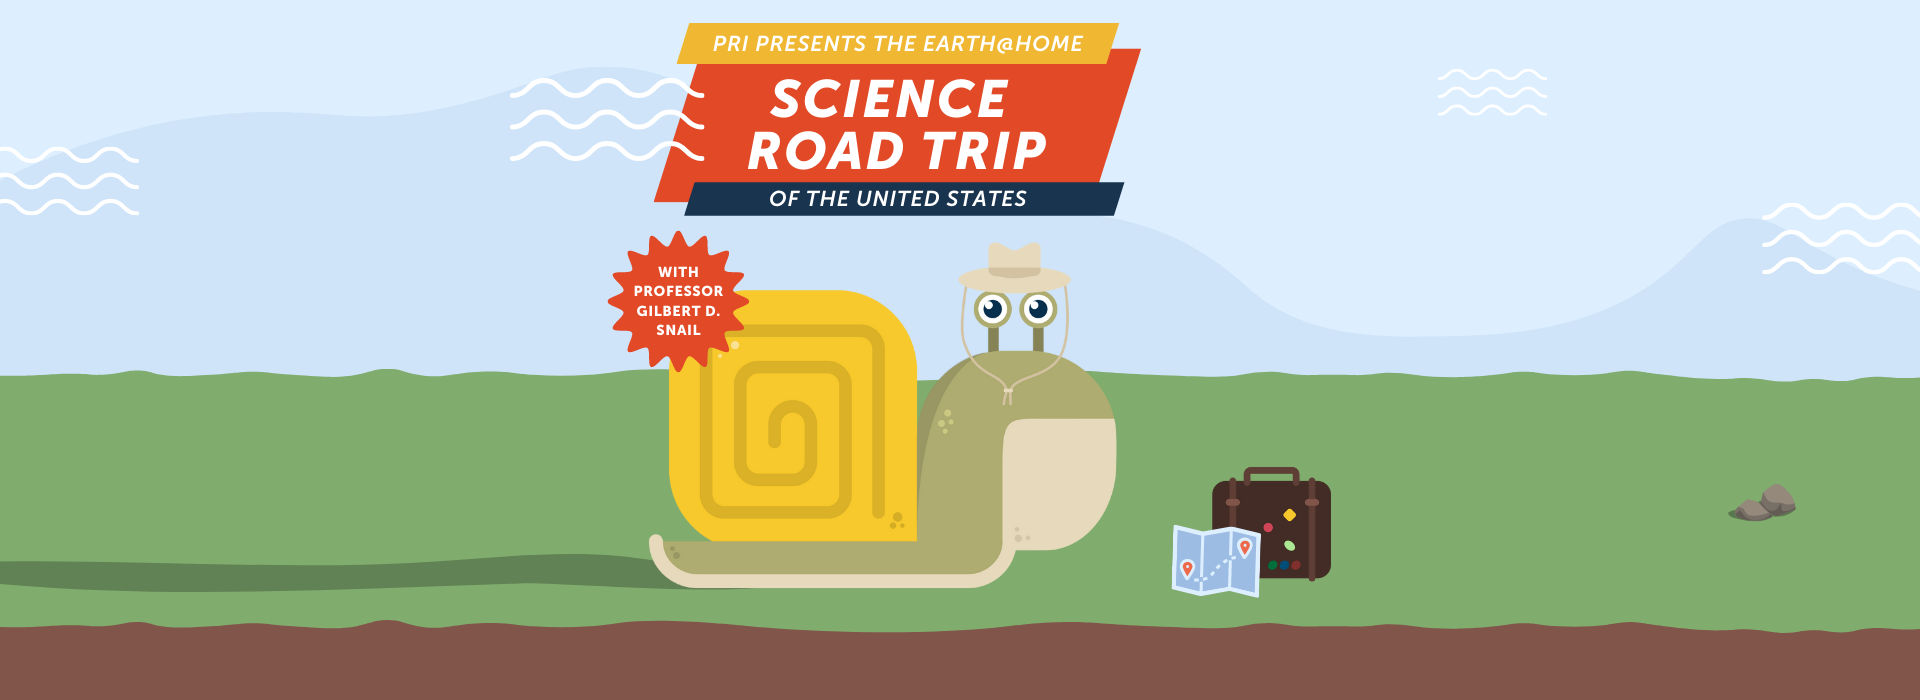 Image showing a cartoon snail and a banner that announces the Earth@Home Science Roadtrip